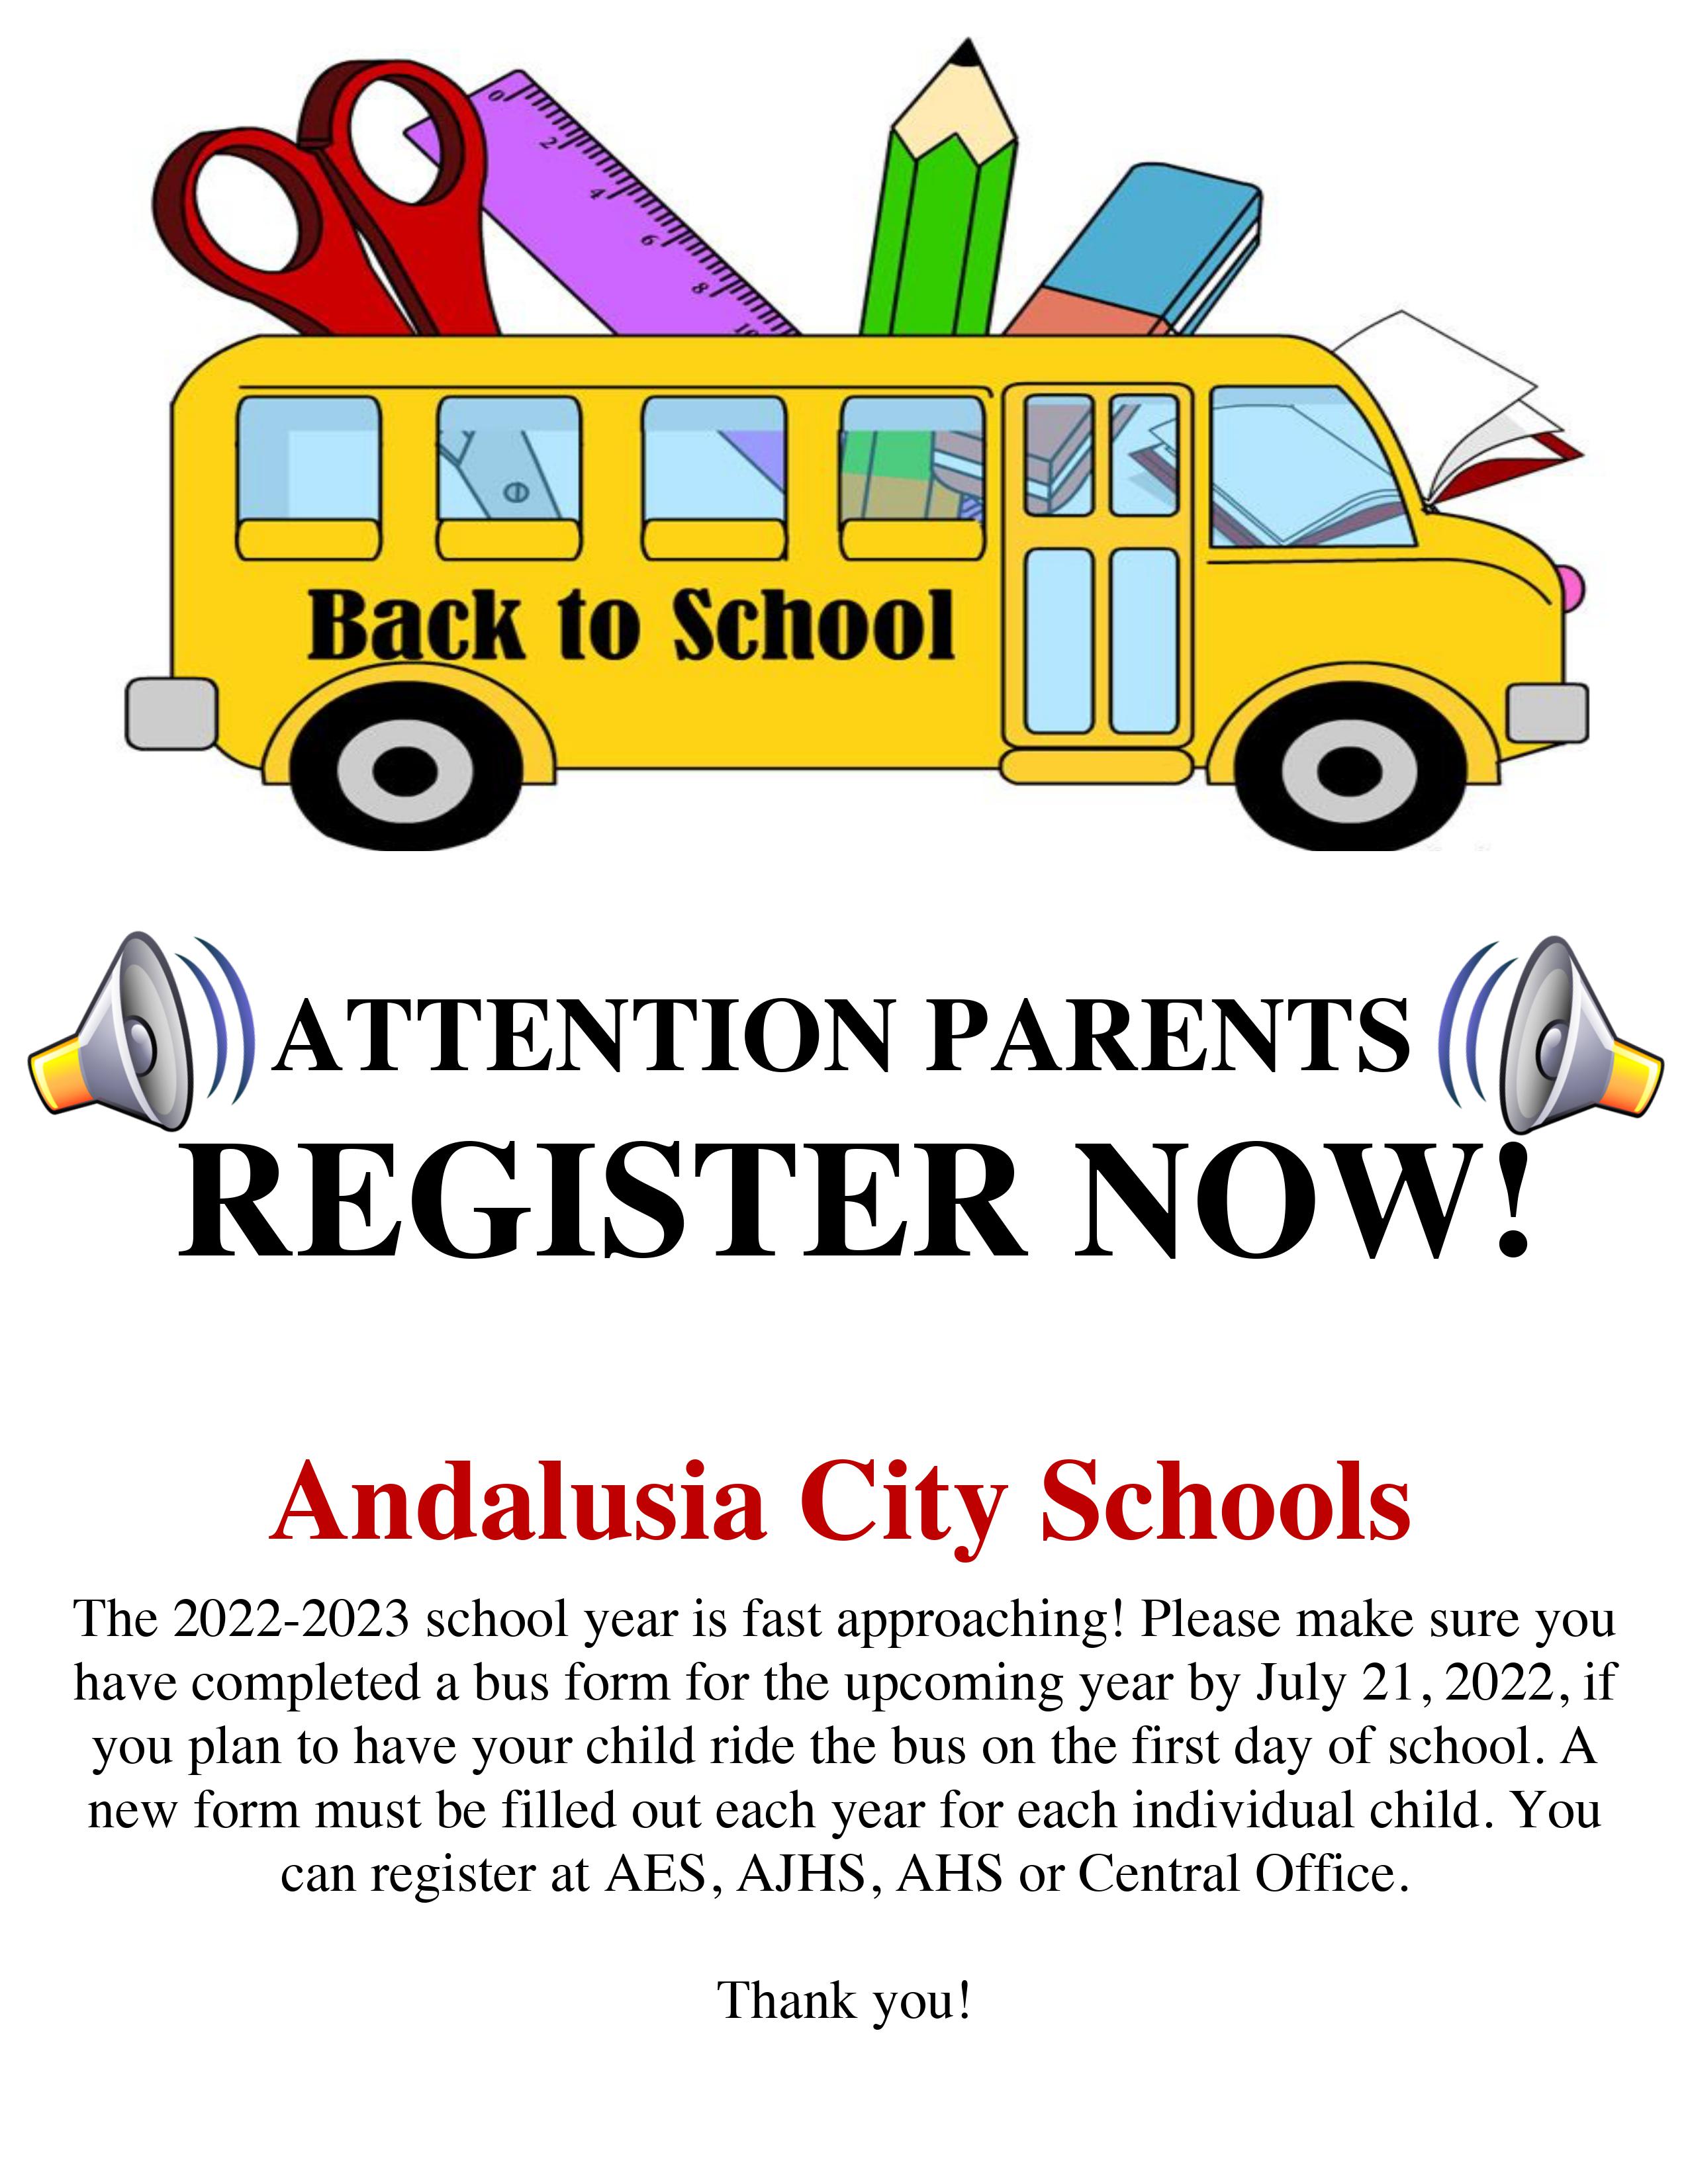 Andalusia City Schools Bus Registration for the 20222023 School Year